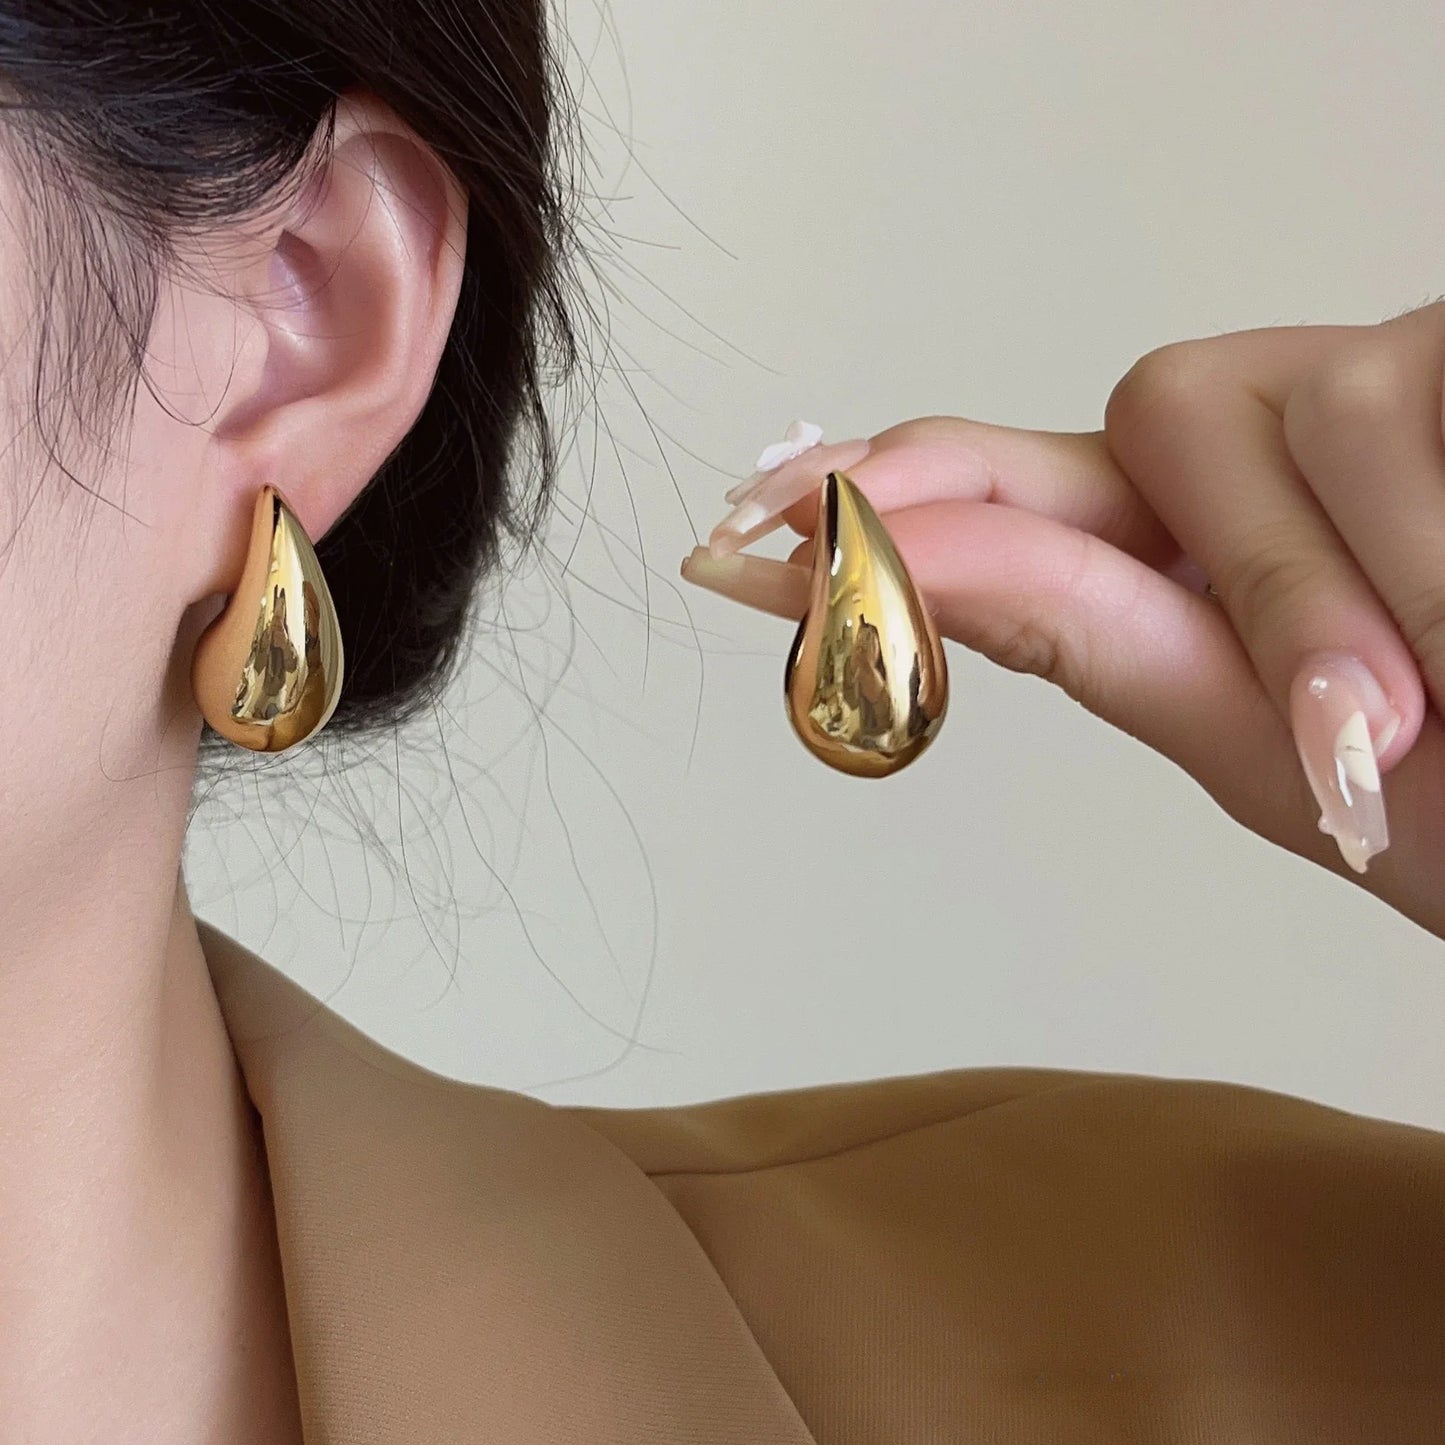 Vintage Gold Plated Chunky Dome Drop Earrings for Women Glossy Thick Teardrop Earrings Dupes Lightweight Hoops Earrings Jewelry